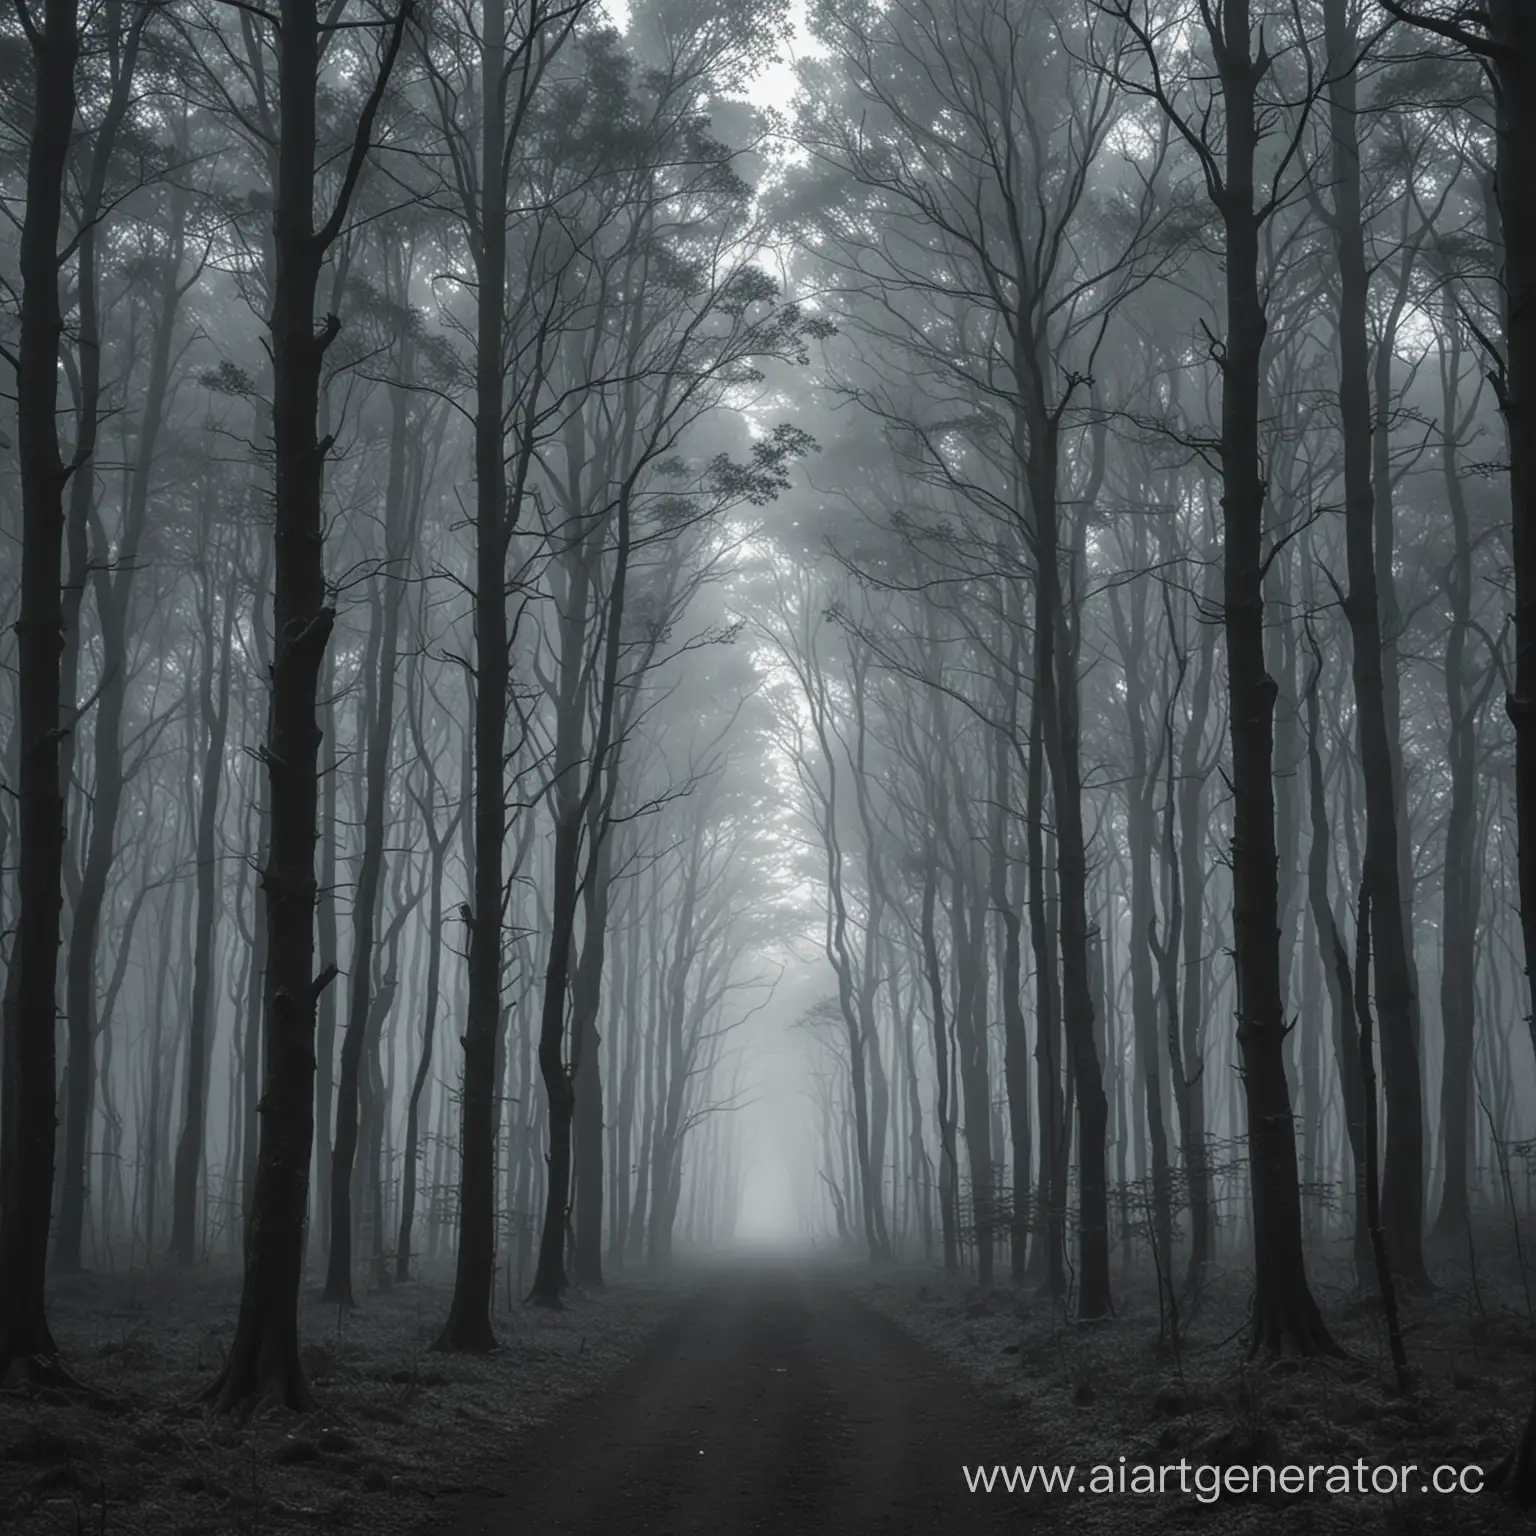 Mystical-Journey-Exploring-the-Enigmatic-Depths-of-a-Gloomy-Forest